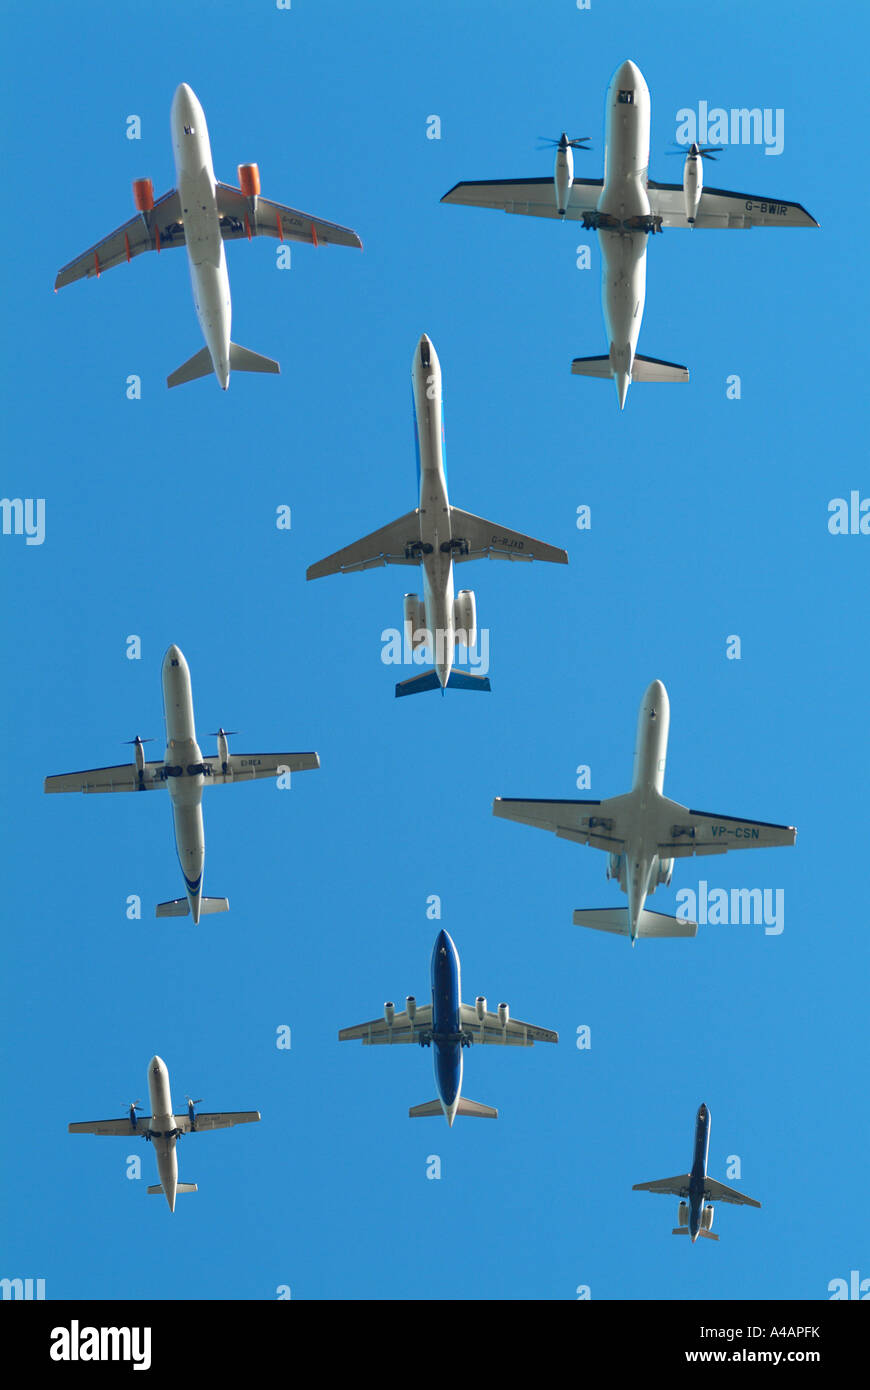 Montage of aircraft arriving at a UK regional airport Stock Photo